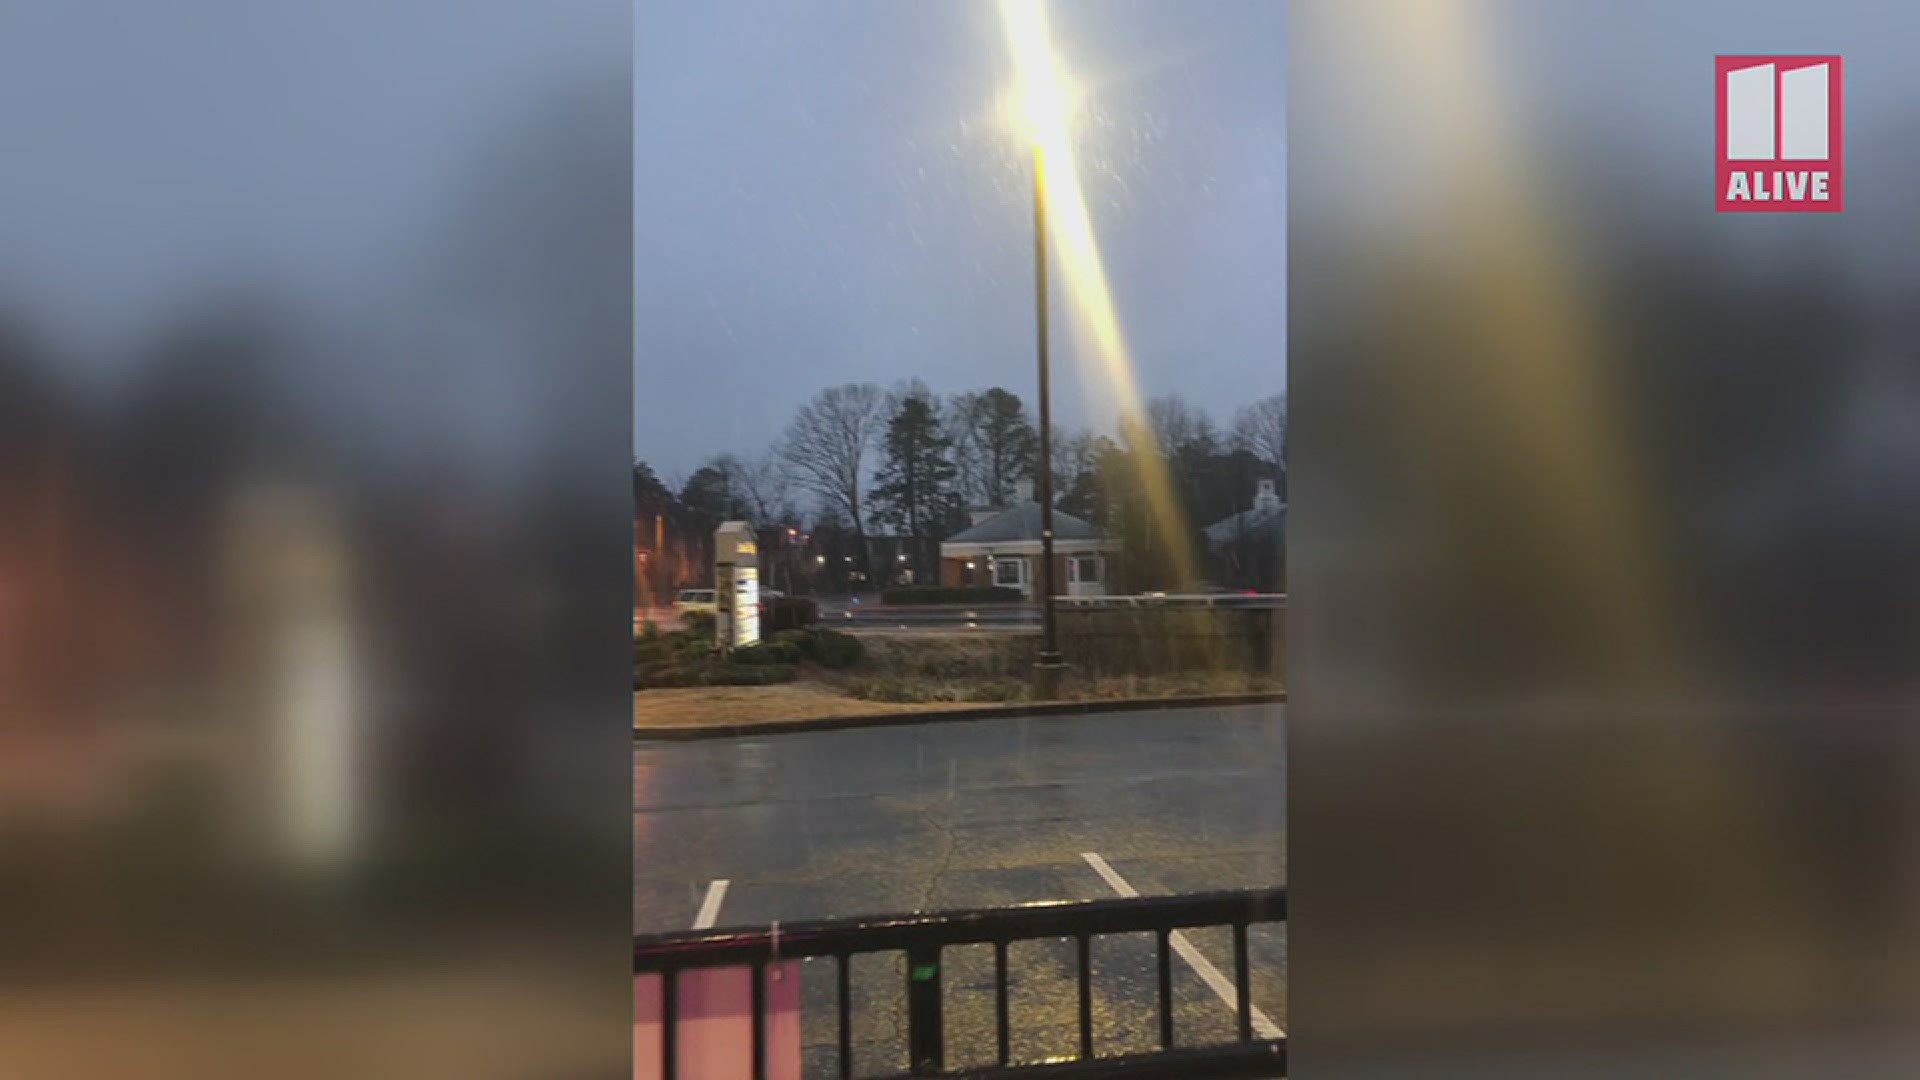 11Alive's Hope Ford spotted this snow beginning to fall in Roswell, Georgia on Fe. 6, 2021